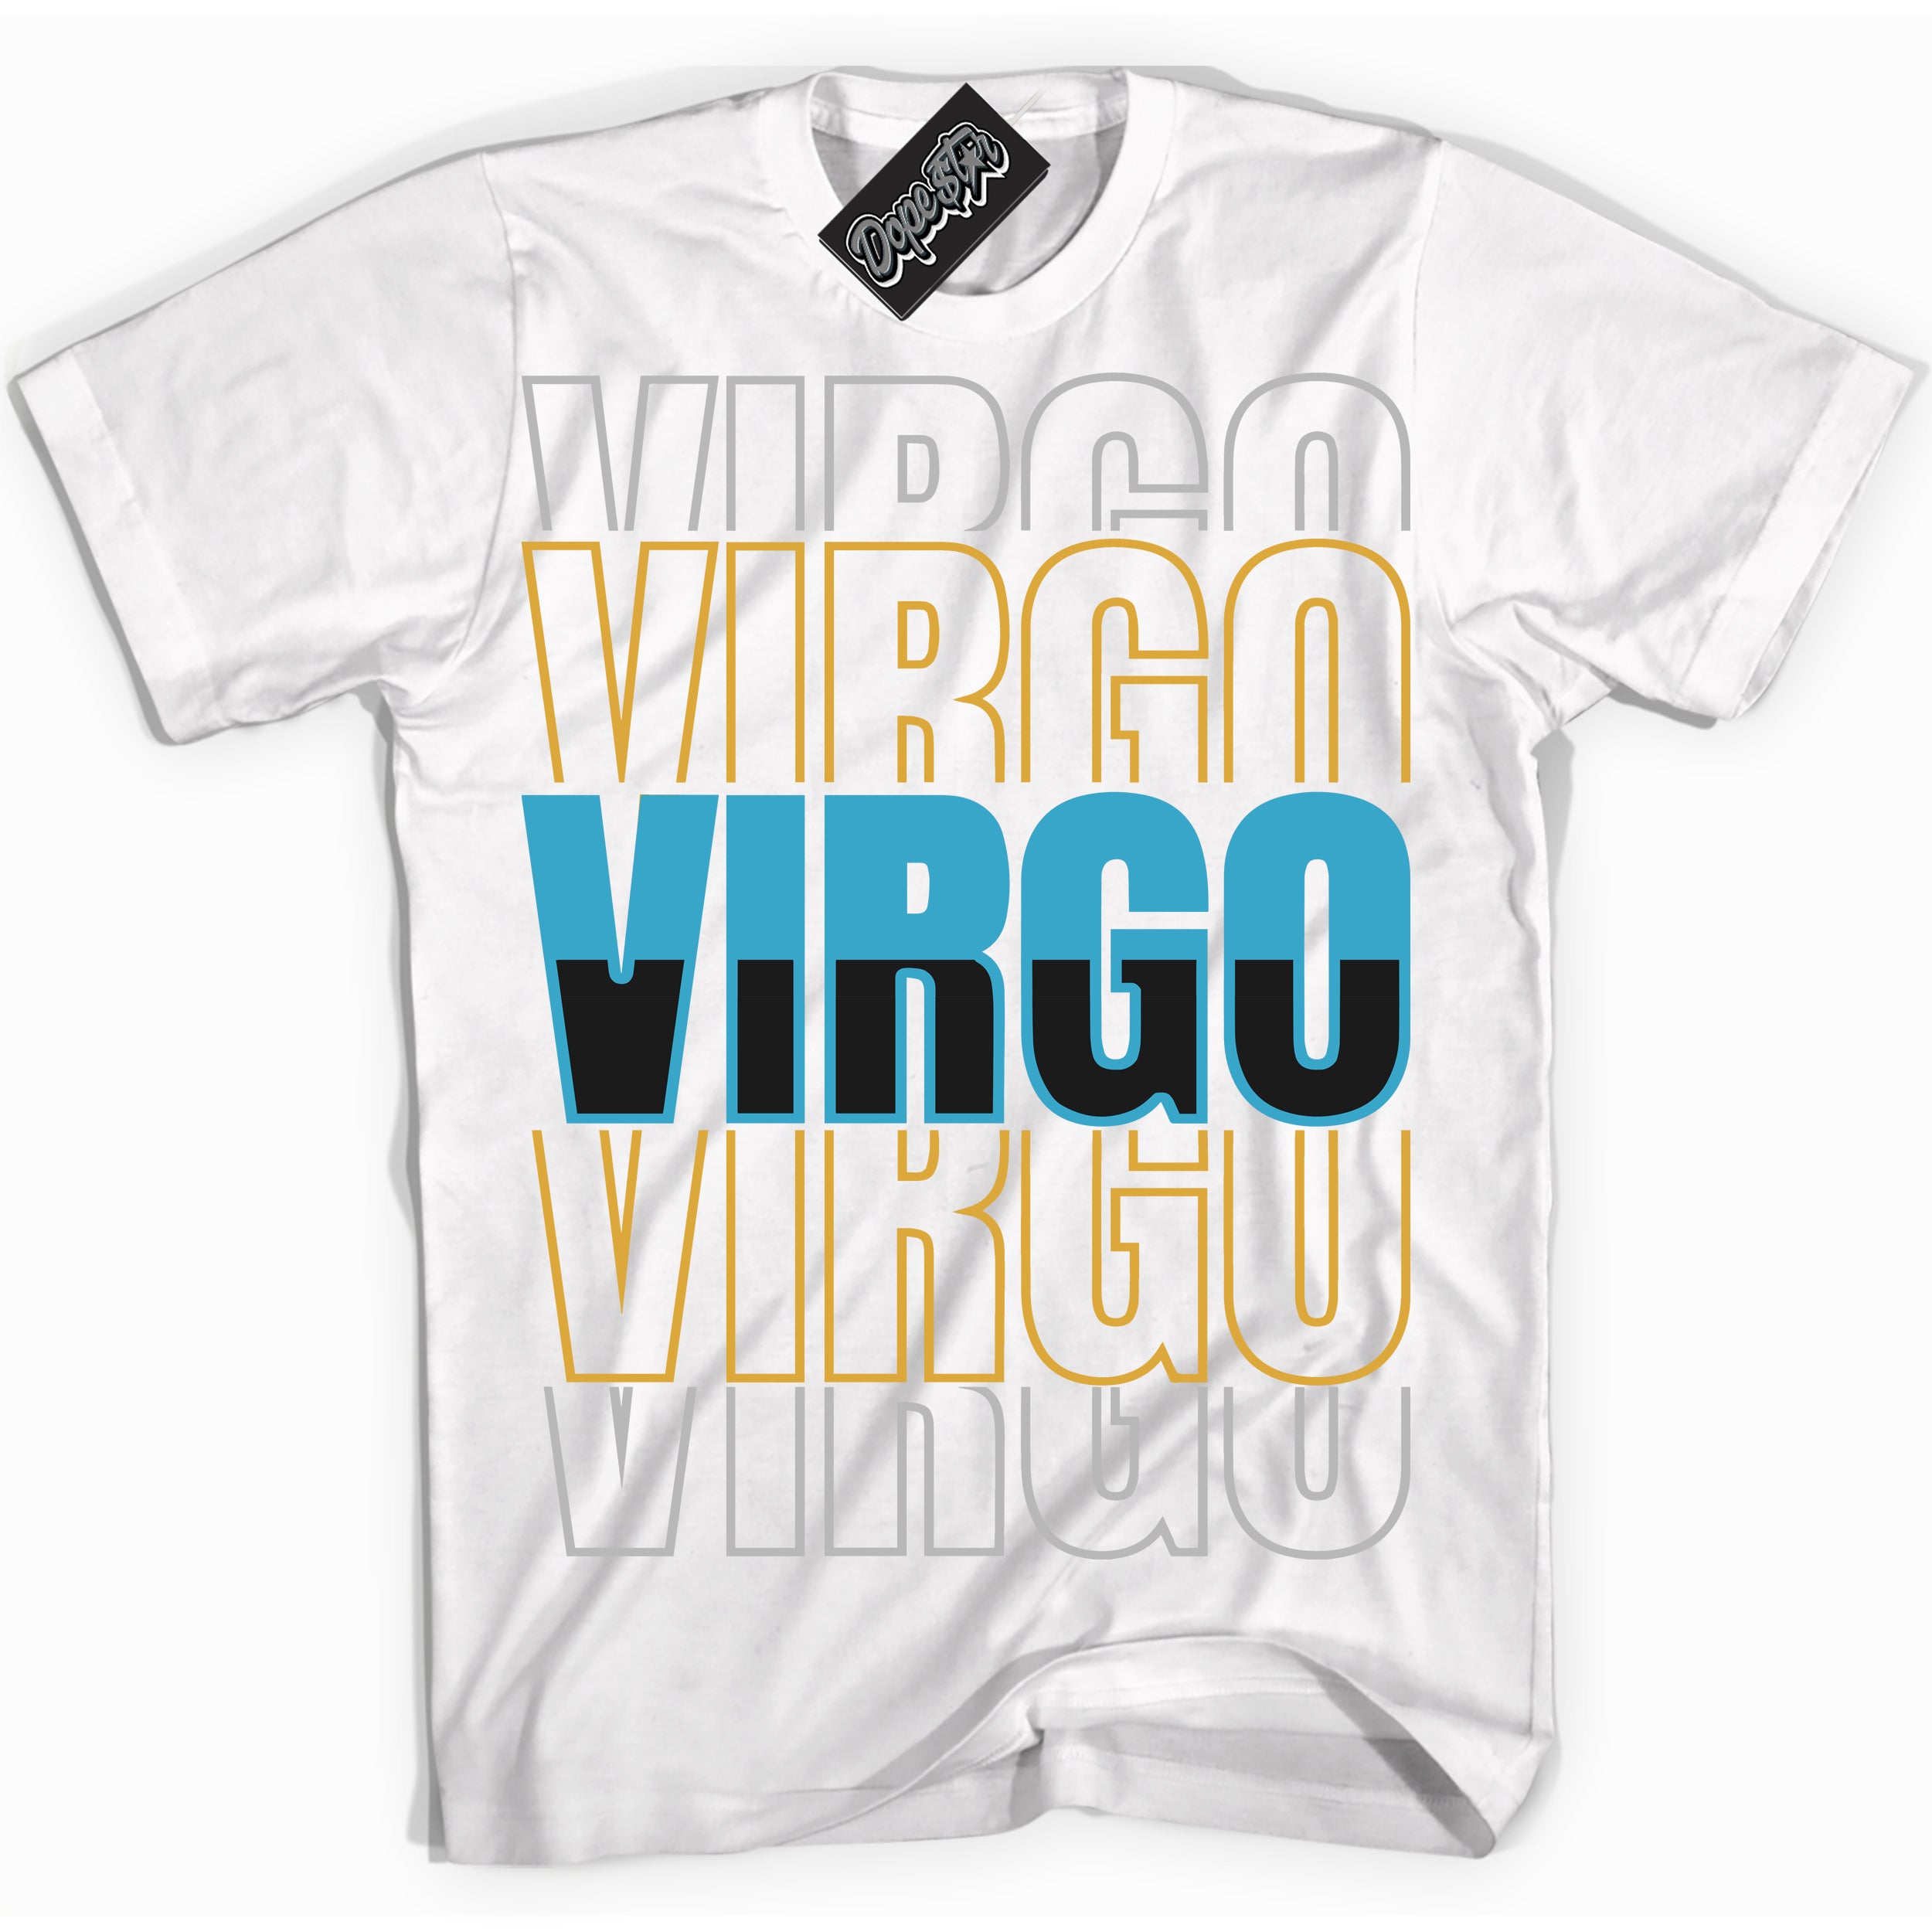 Cool White Shirt with “ Virgo” design that perfectly matches Aqua 5s Sneakers.